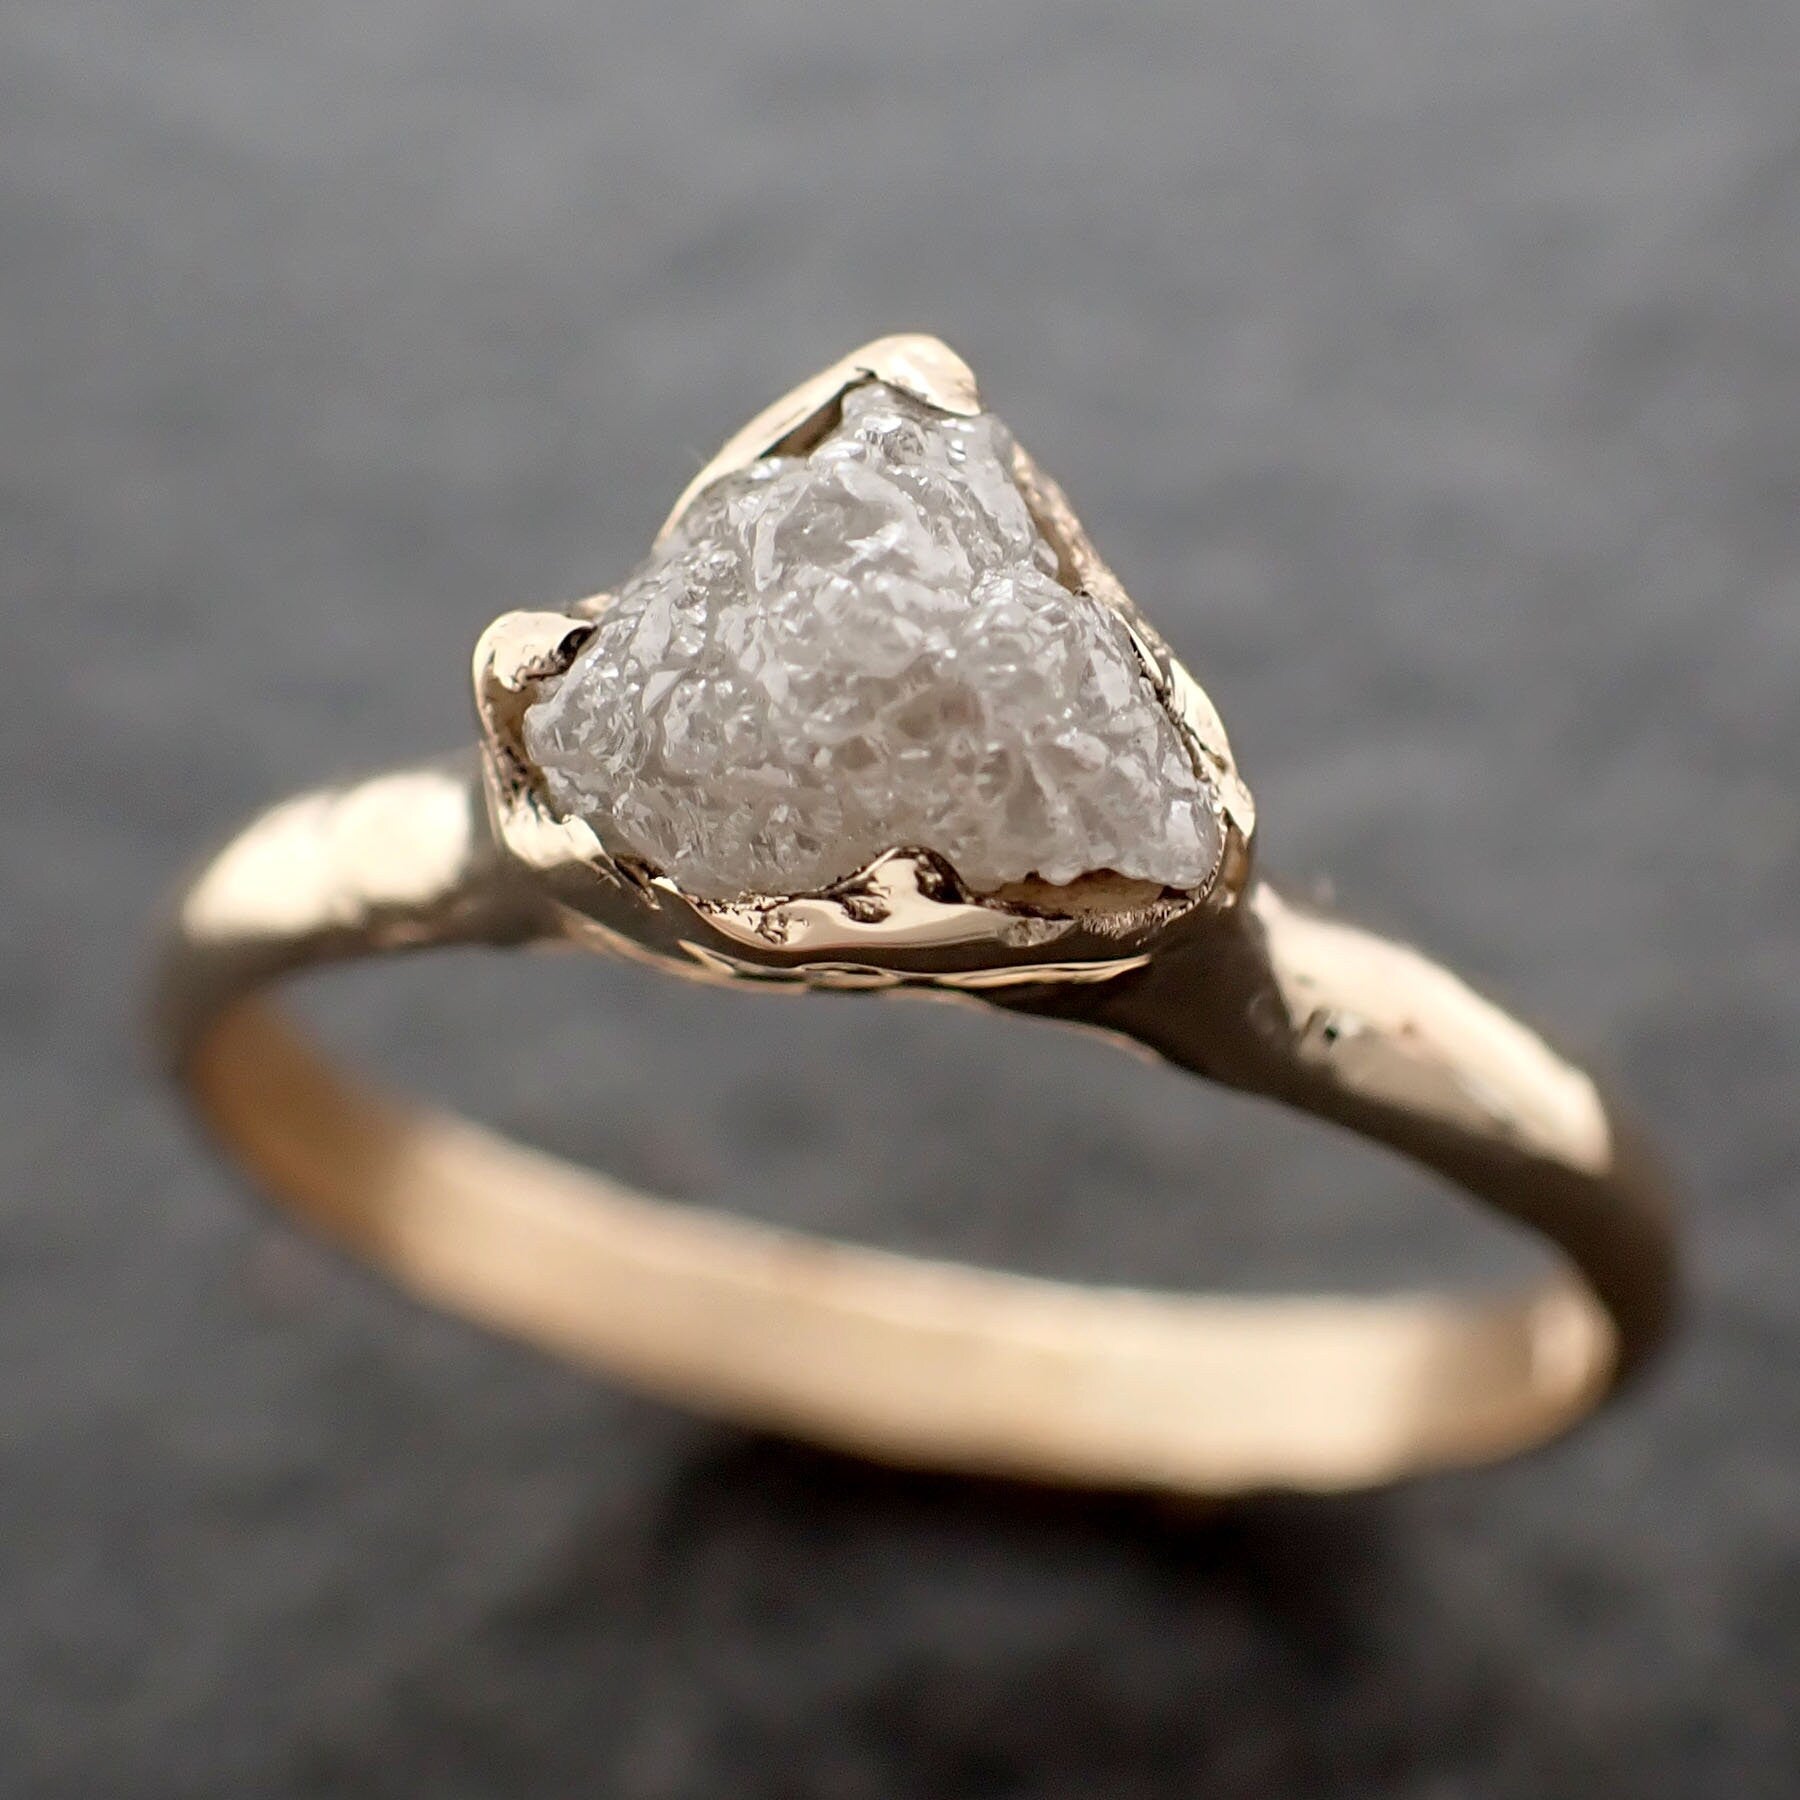 Rustic Diamond With 3mm Diamond Conflict Free Engagement Ring, Sterling  Silver and 18k Gold - Etsy